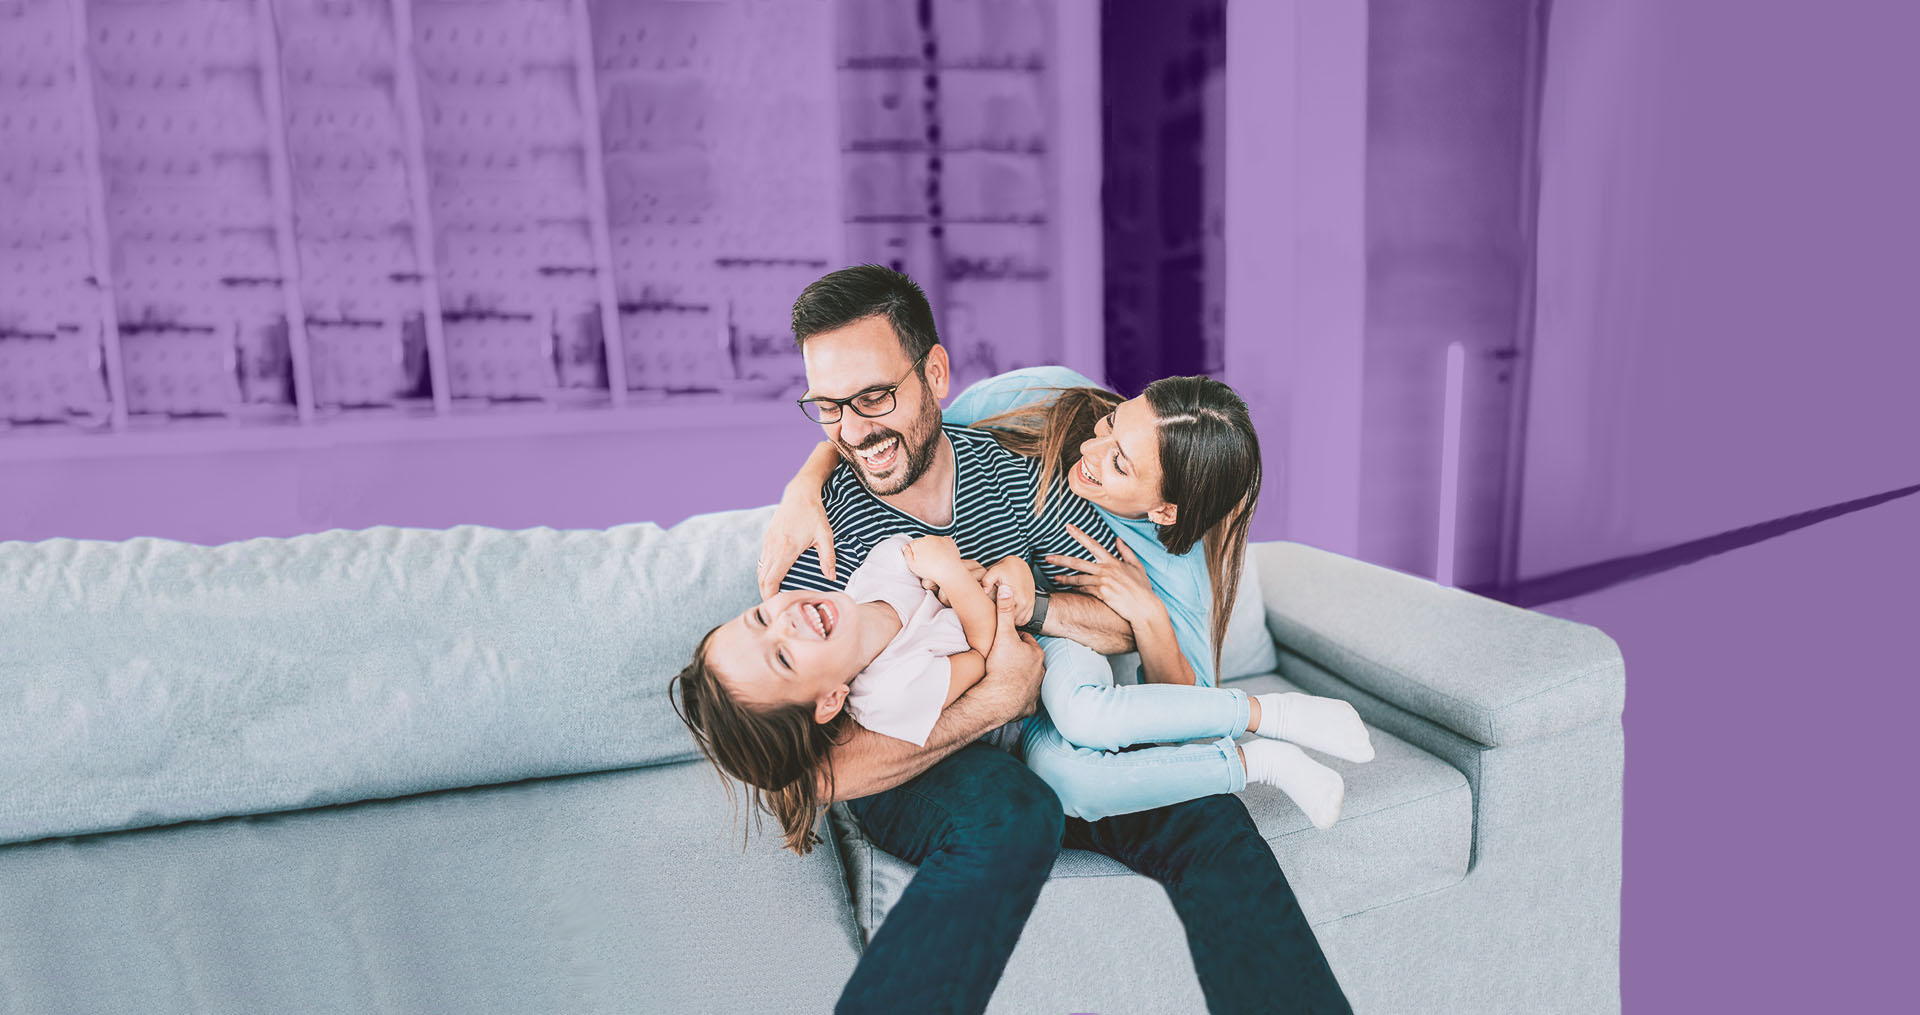 Image of a family laughing and sitting on a couch